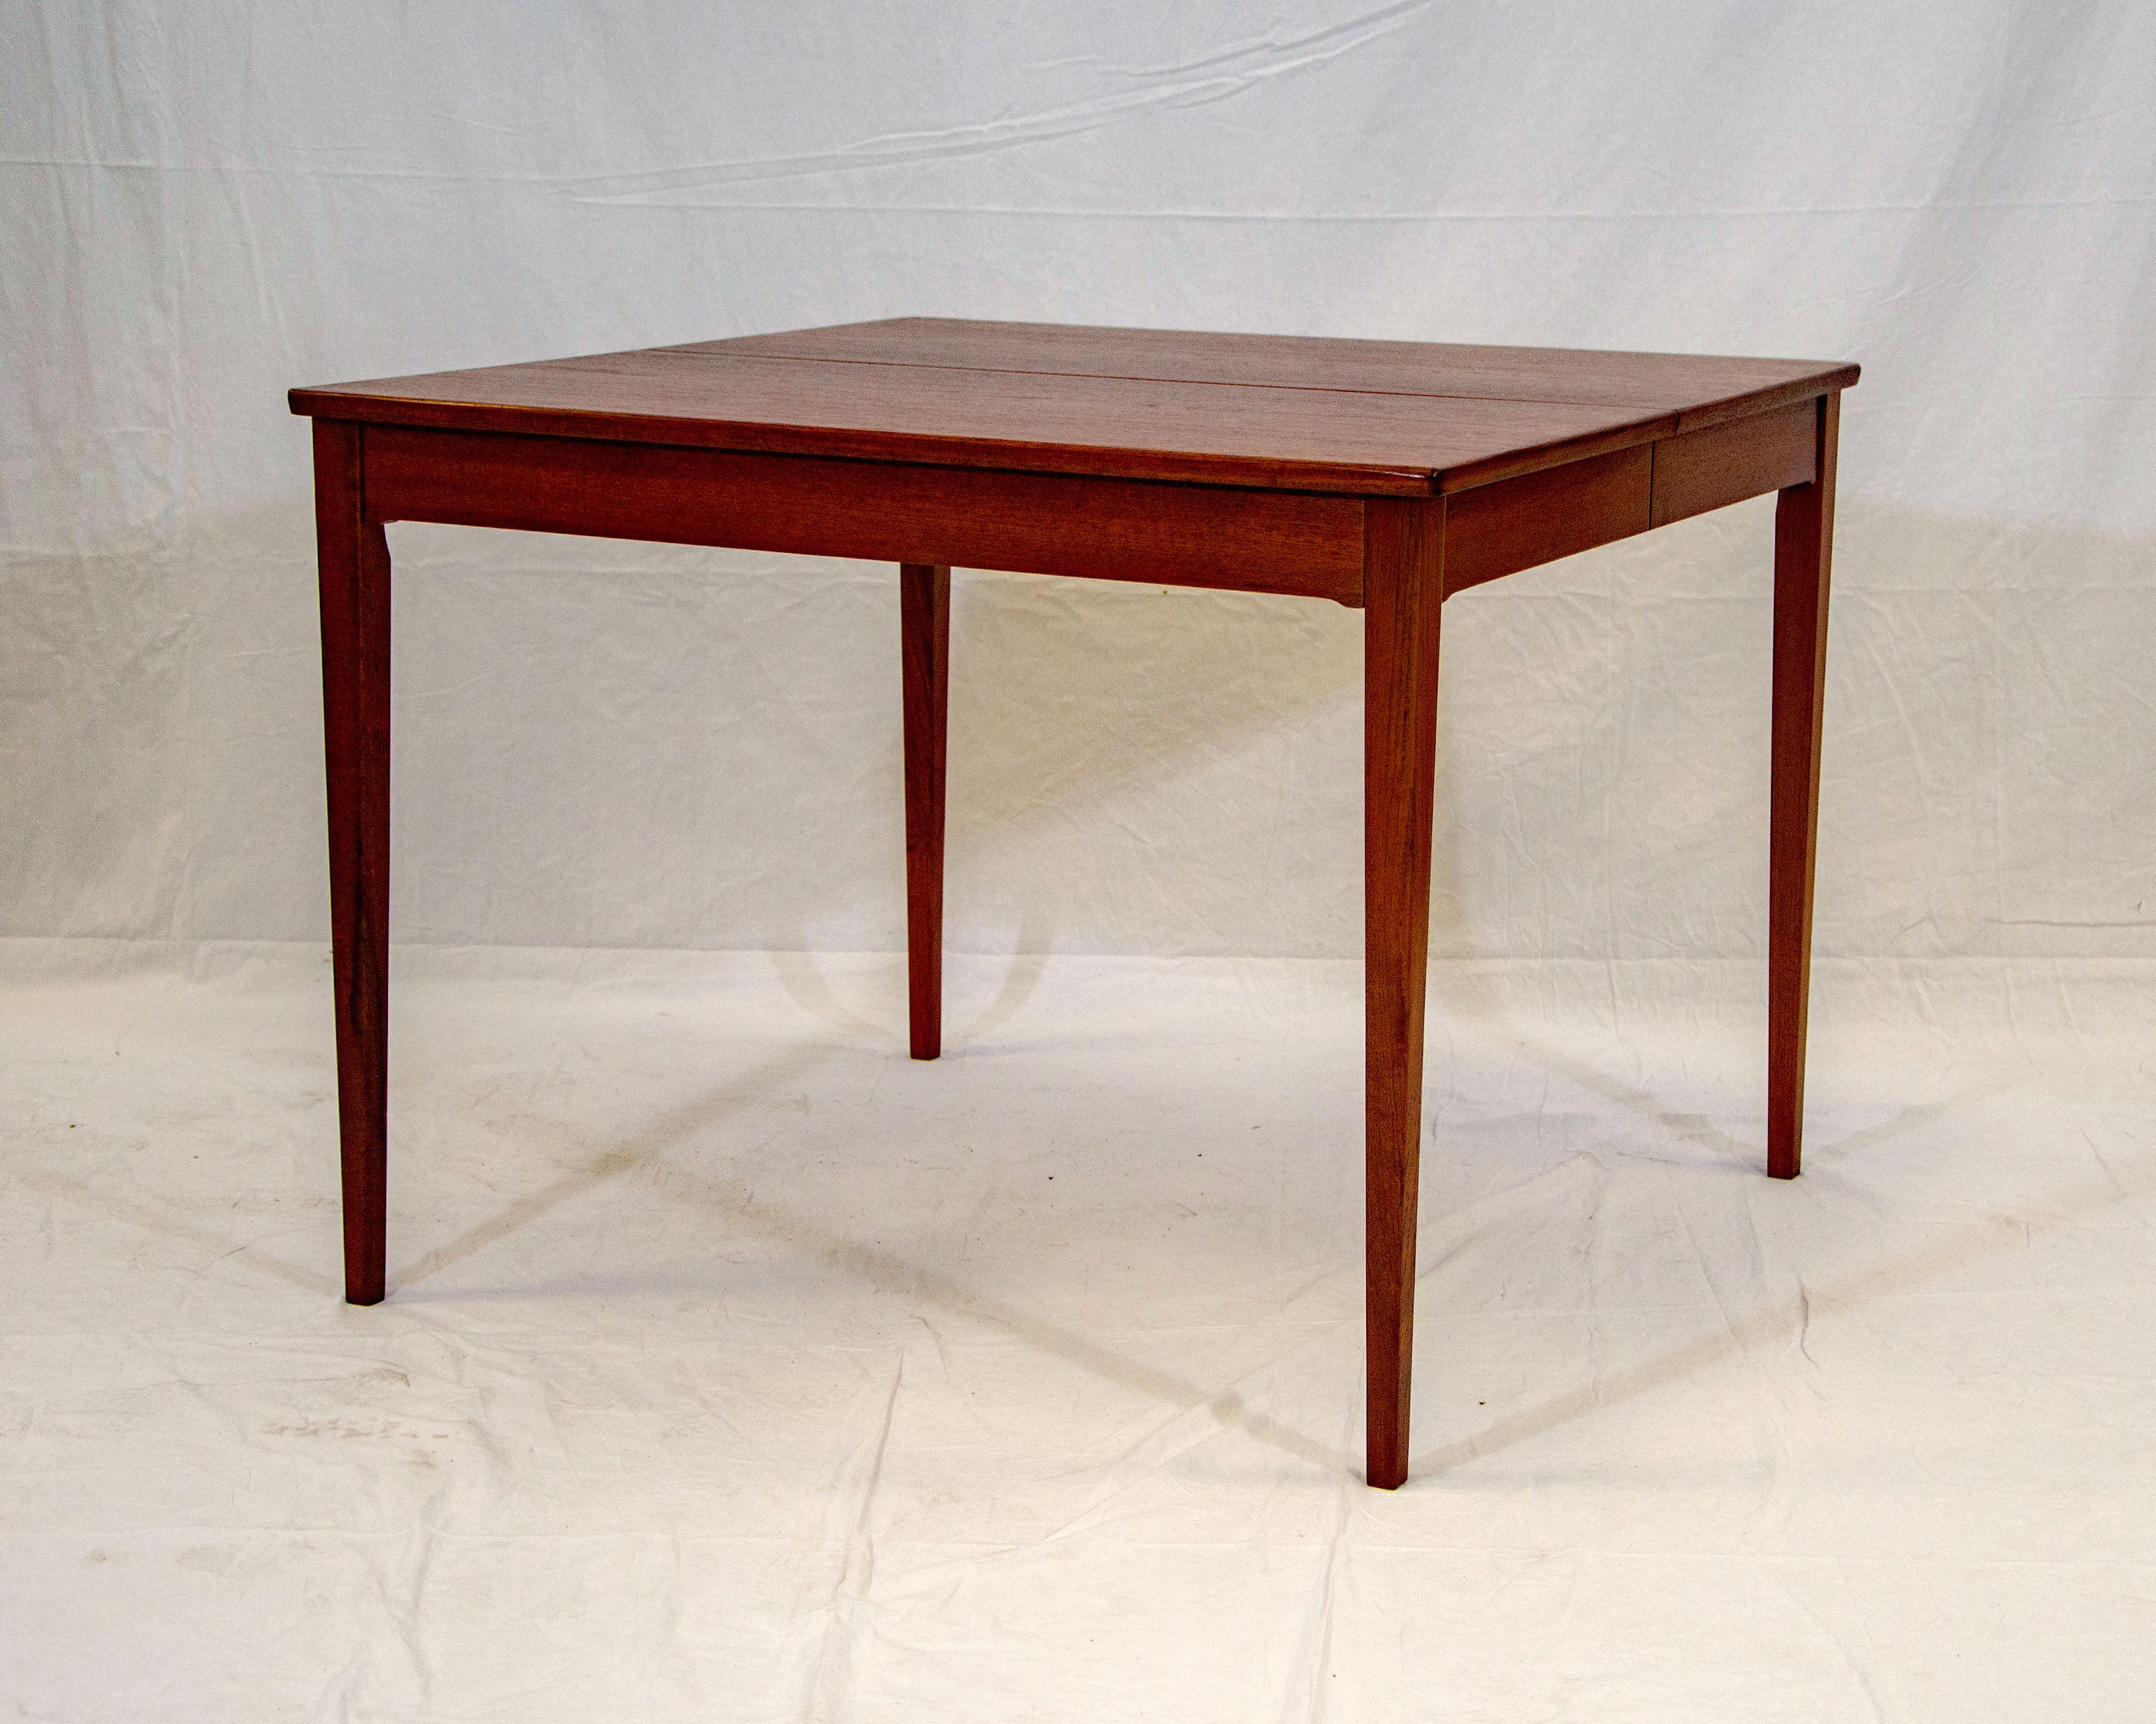 Smaller size square Danish teak dining table designed by Svend Langkilde and manufactured by Langkilde Møbler with two 19